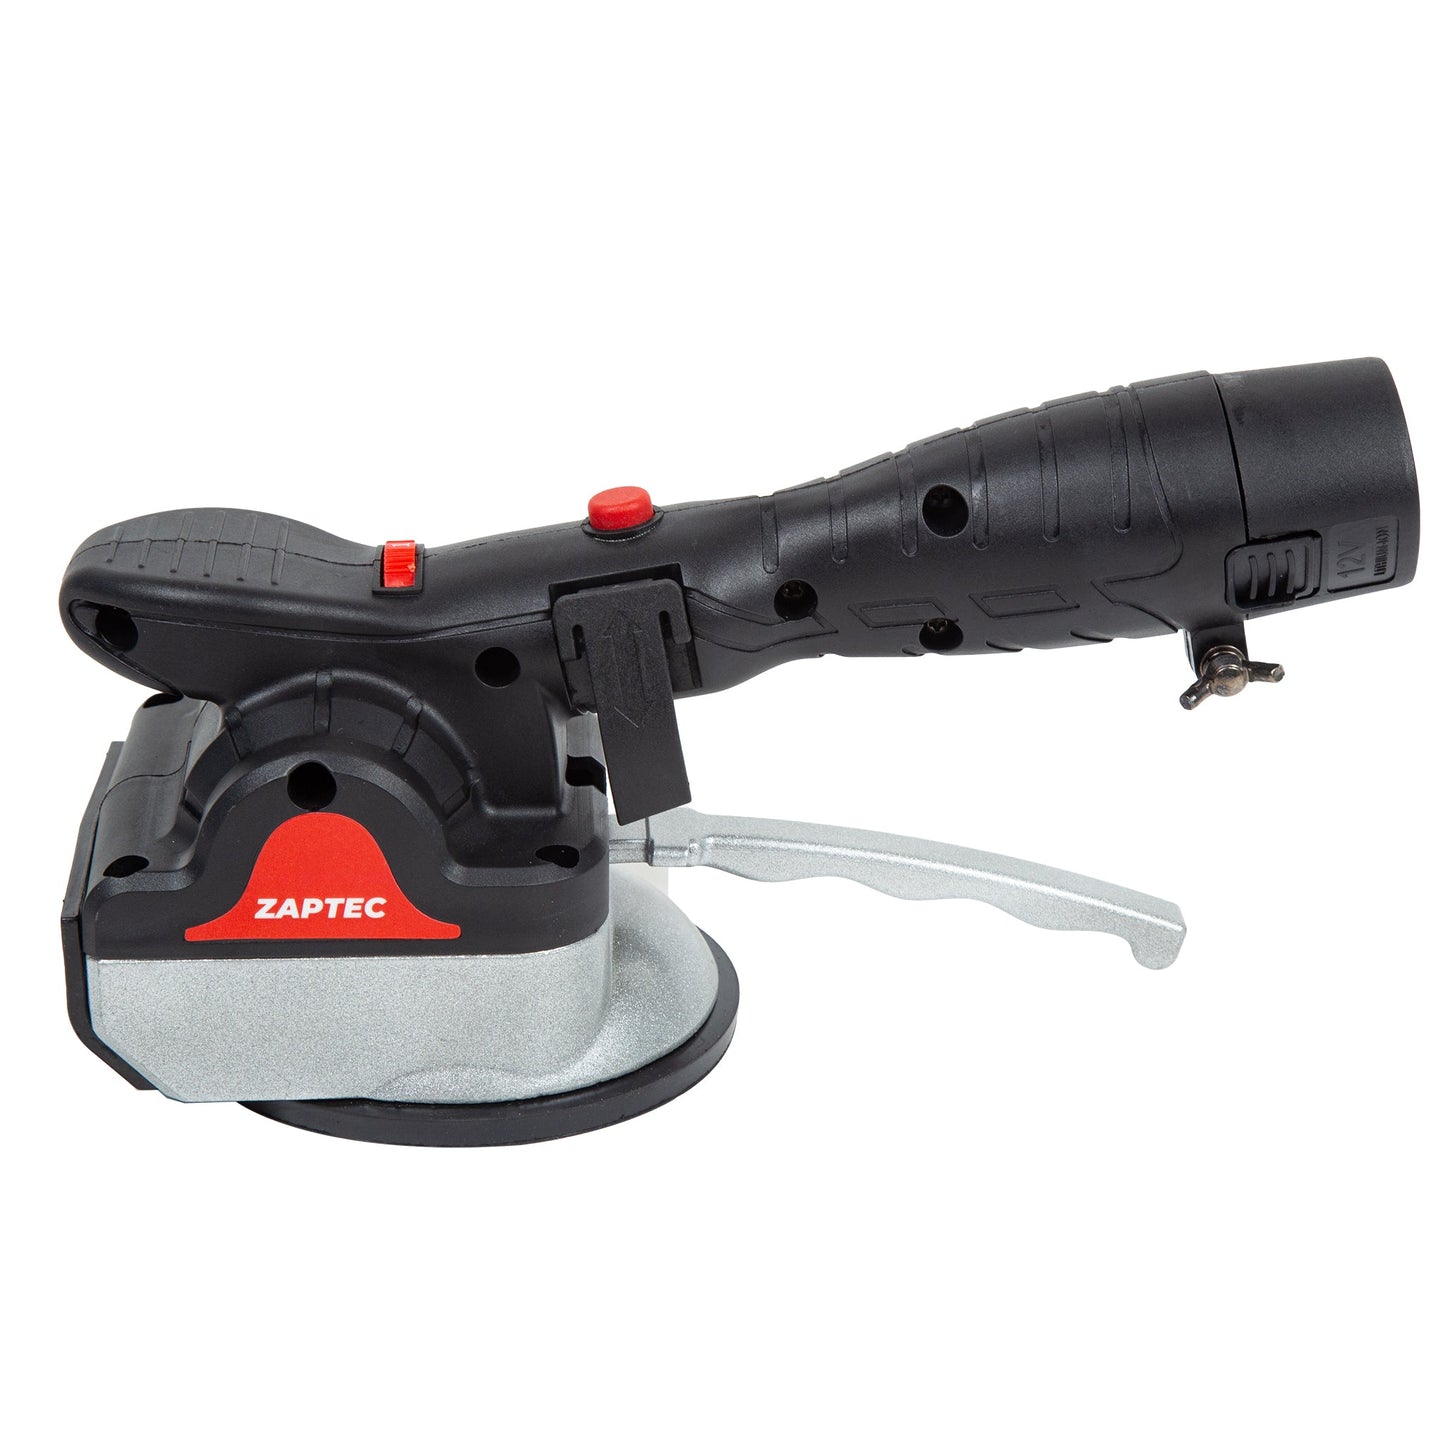 Zaptec Cordless Tile Vibrator 12V With Adjustable 6 Speed 18,000 VPM for Removing Air Bubbles During Tile Laying